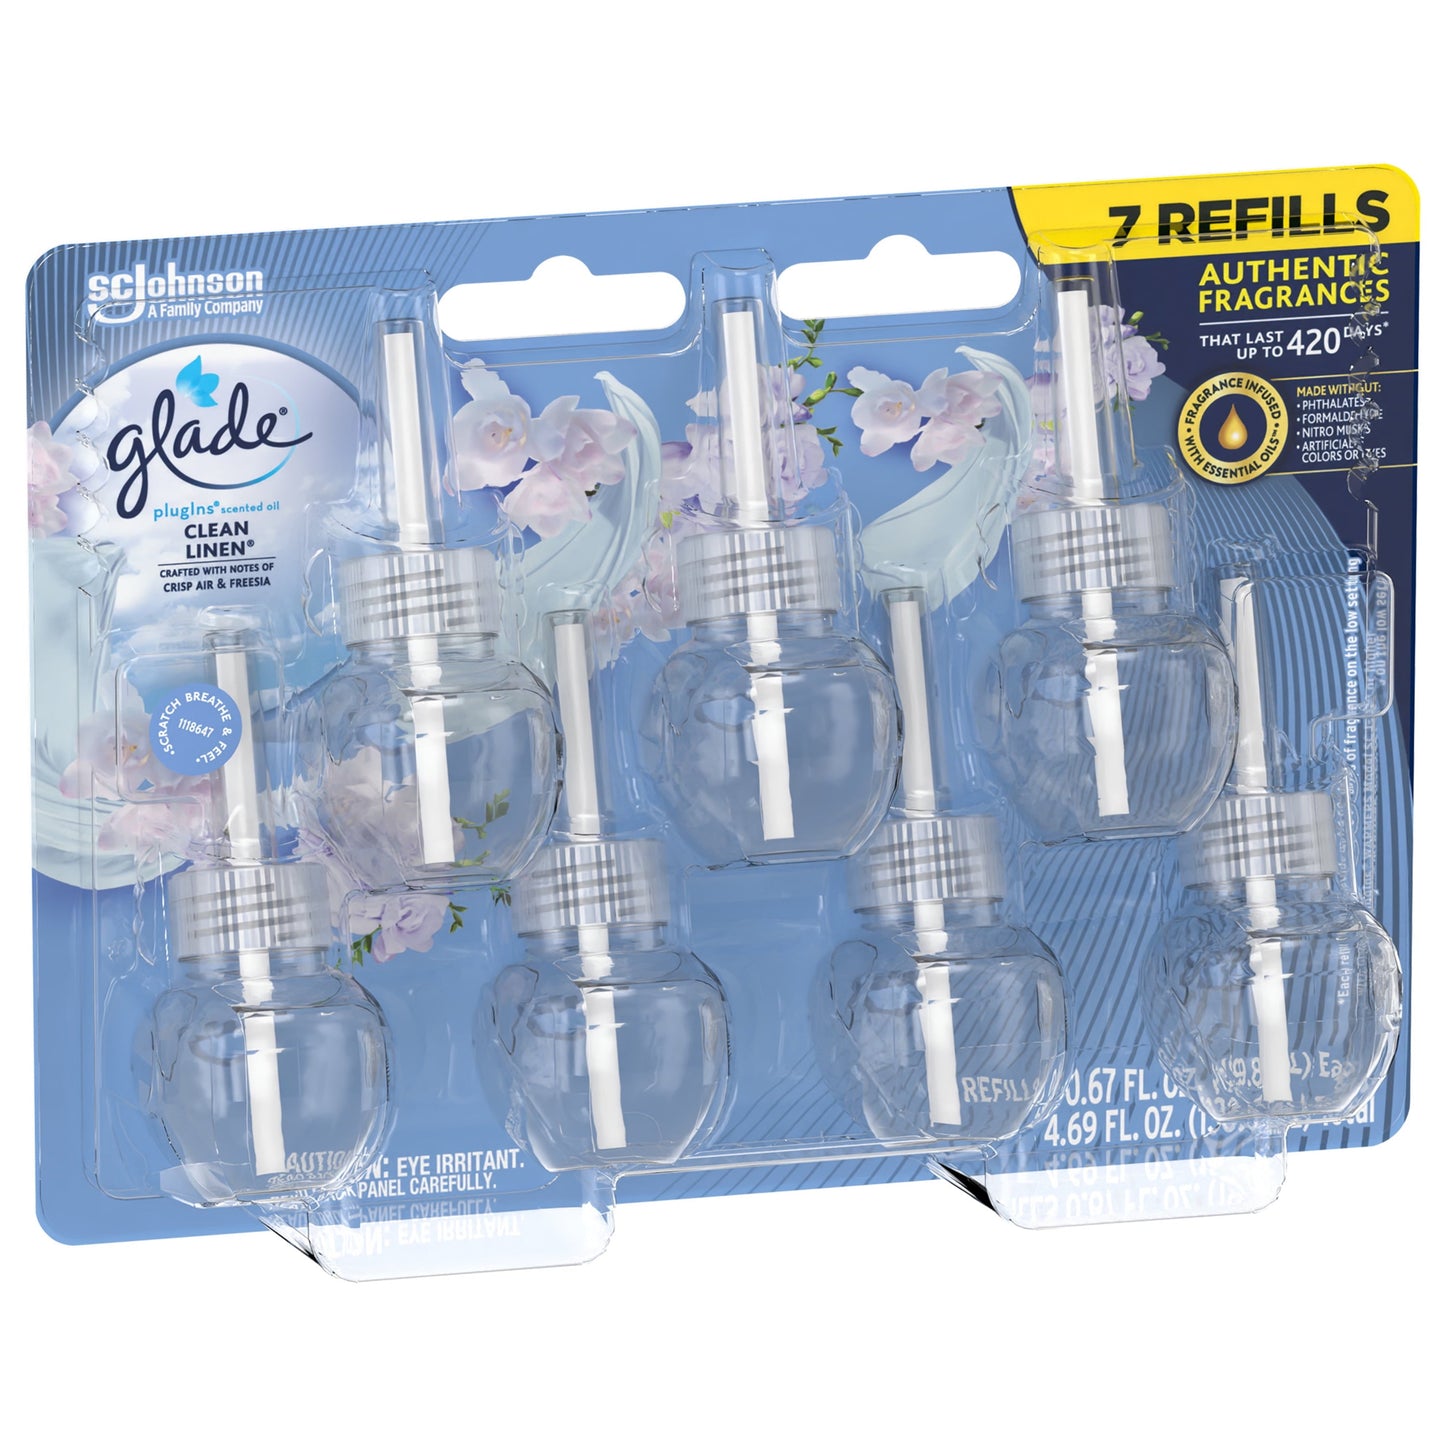 Glade PlugIns Scented Oil Refill Clean Linen, Essential Oil Infused Wall Plug In, 4.69 fl oz, Pack of 7